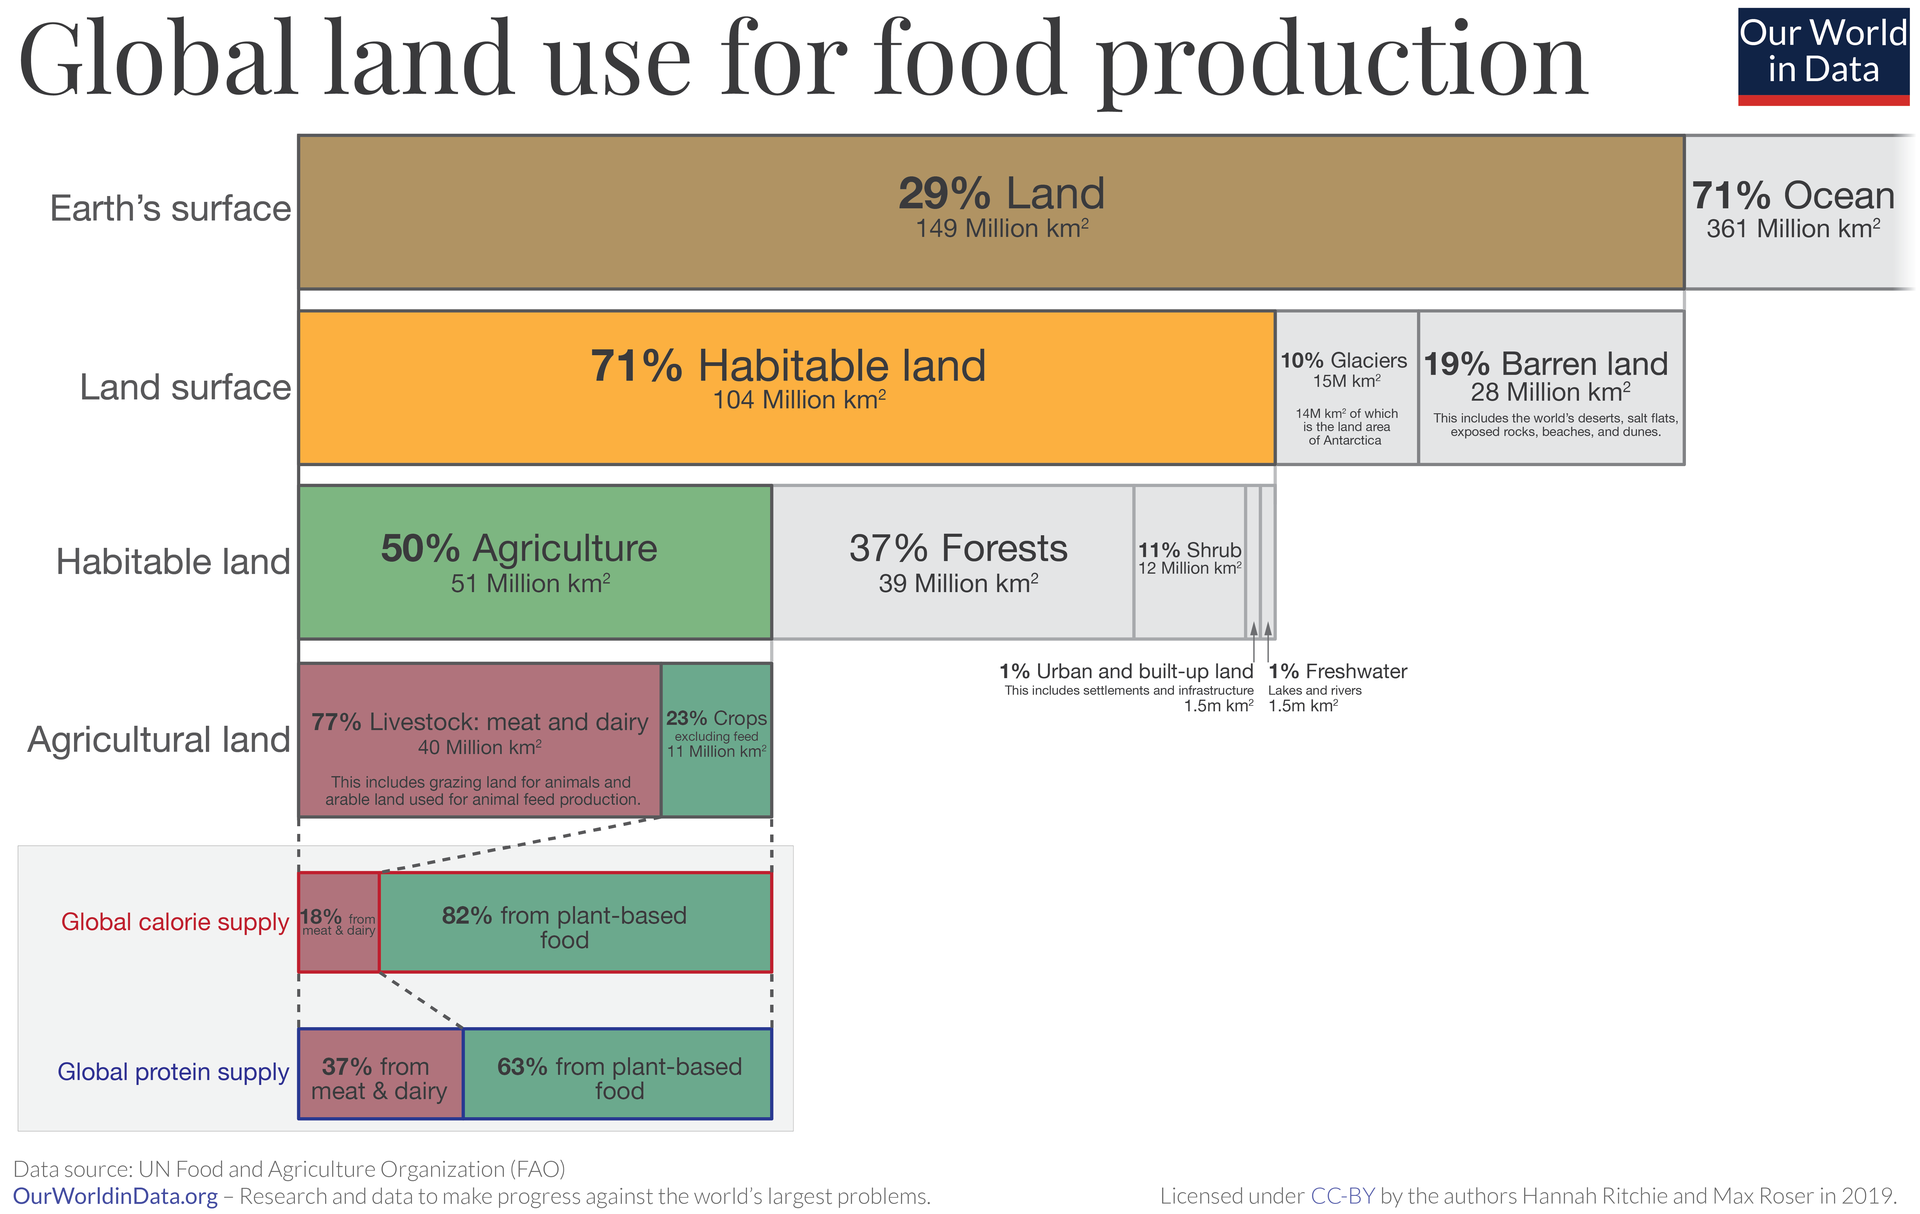 Global land use for food production, Erth's surface, habitable and agricultural